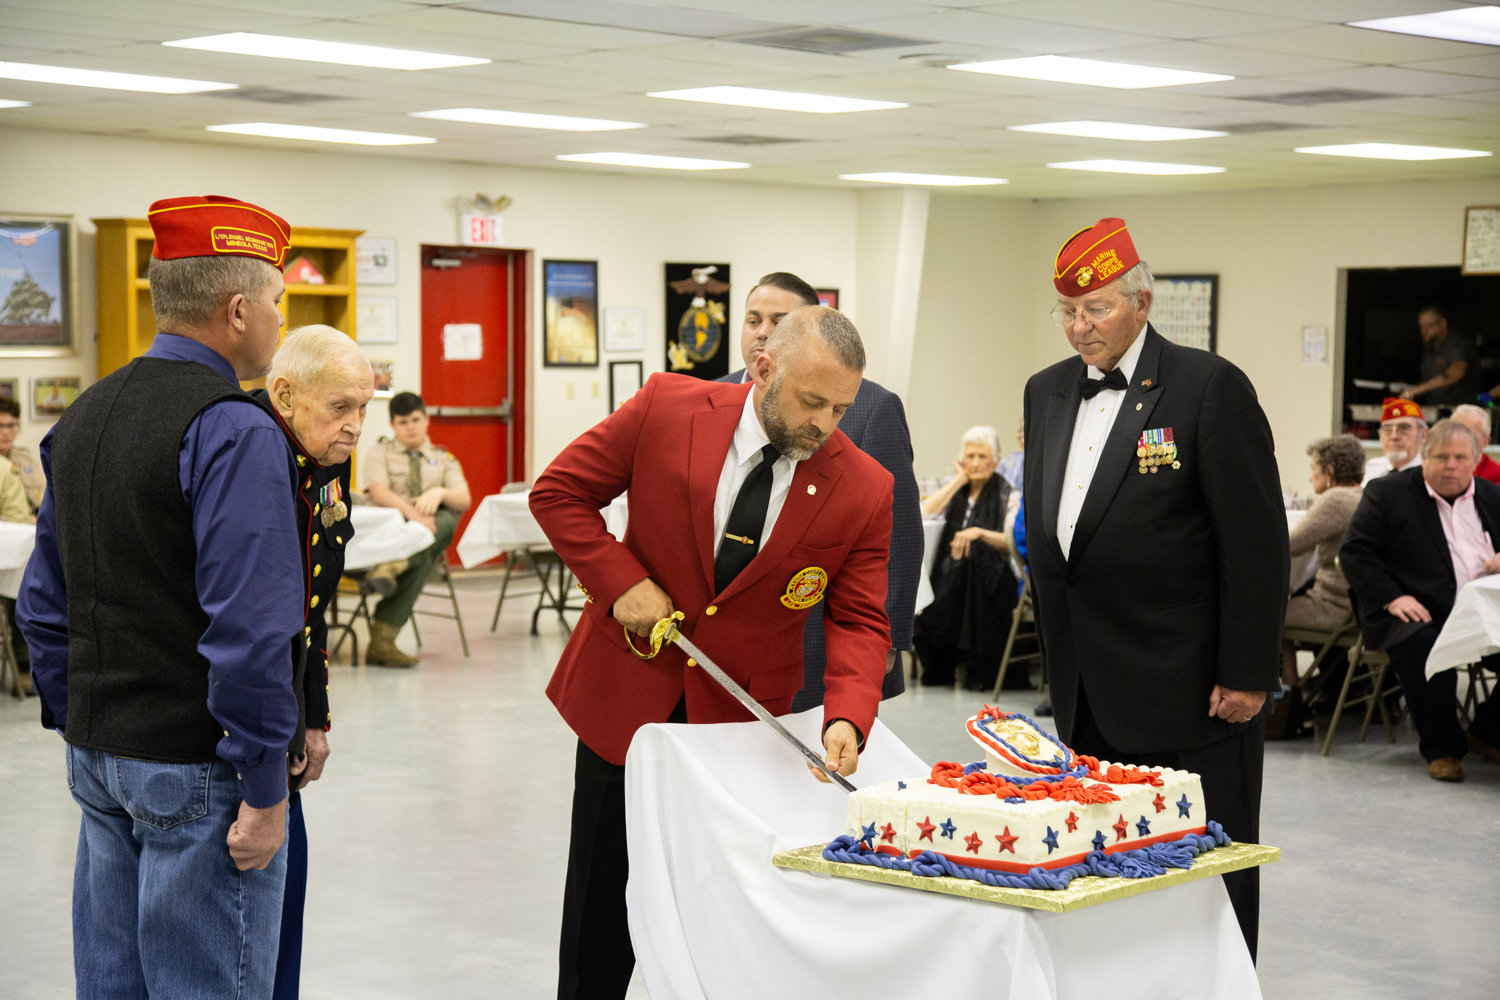 Marine Corps League Commandant Kelly Smith cuts the Marine Corps birth- day cake with the traditional Mameluke sword. The oldest Marine present, PFC James Krodel, and youngest Marine present, Lance Corporal Brandon Baade, watch with cake escorts James Biesheuvel and Mike Jernigan.